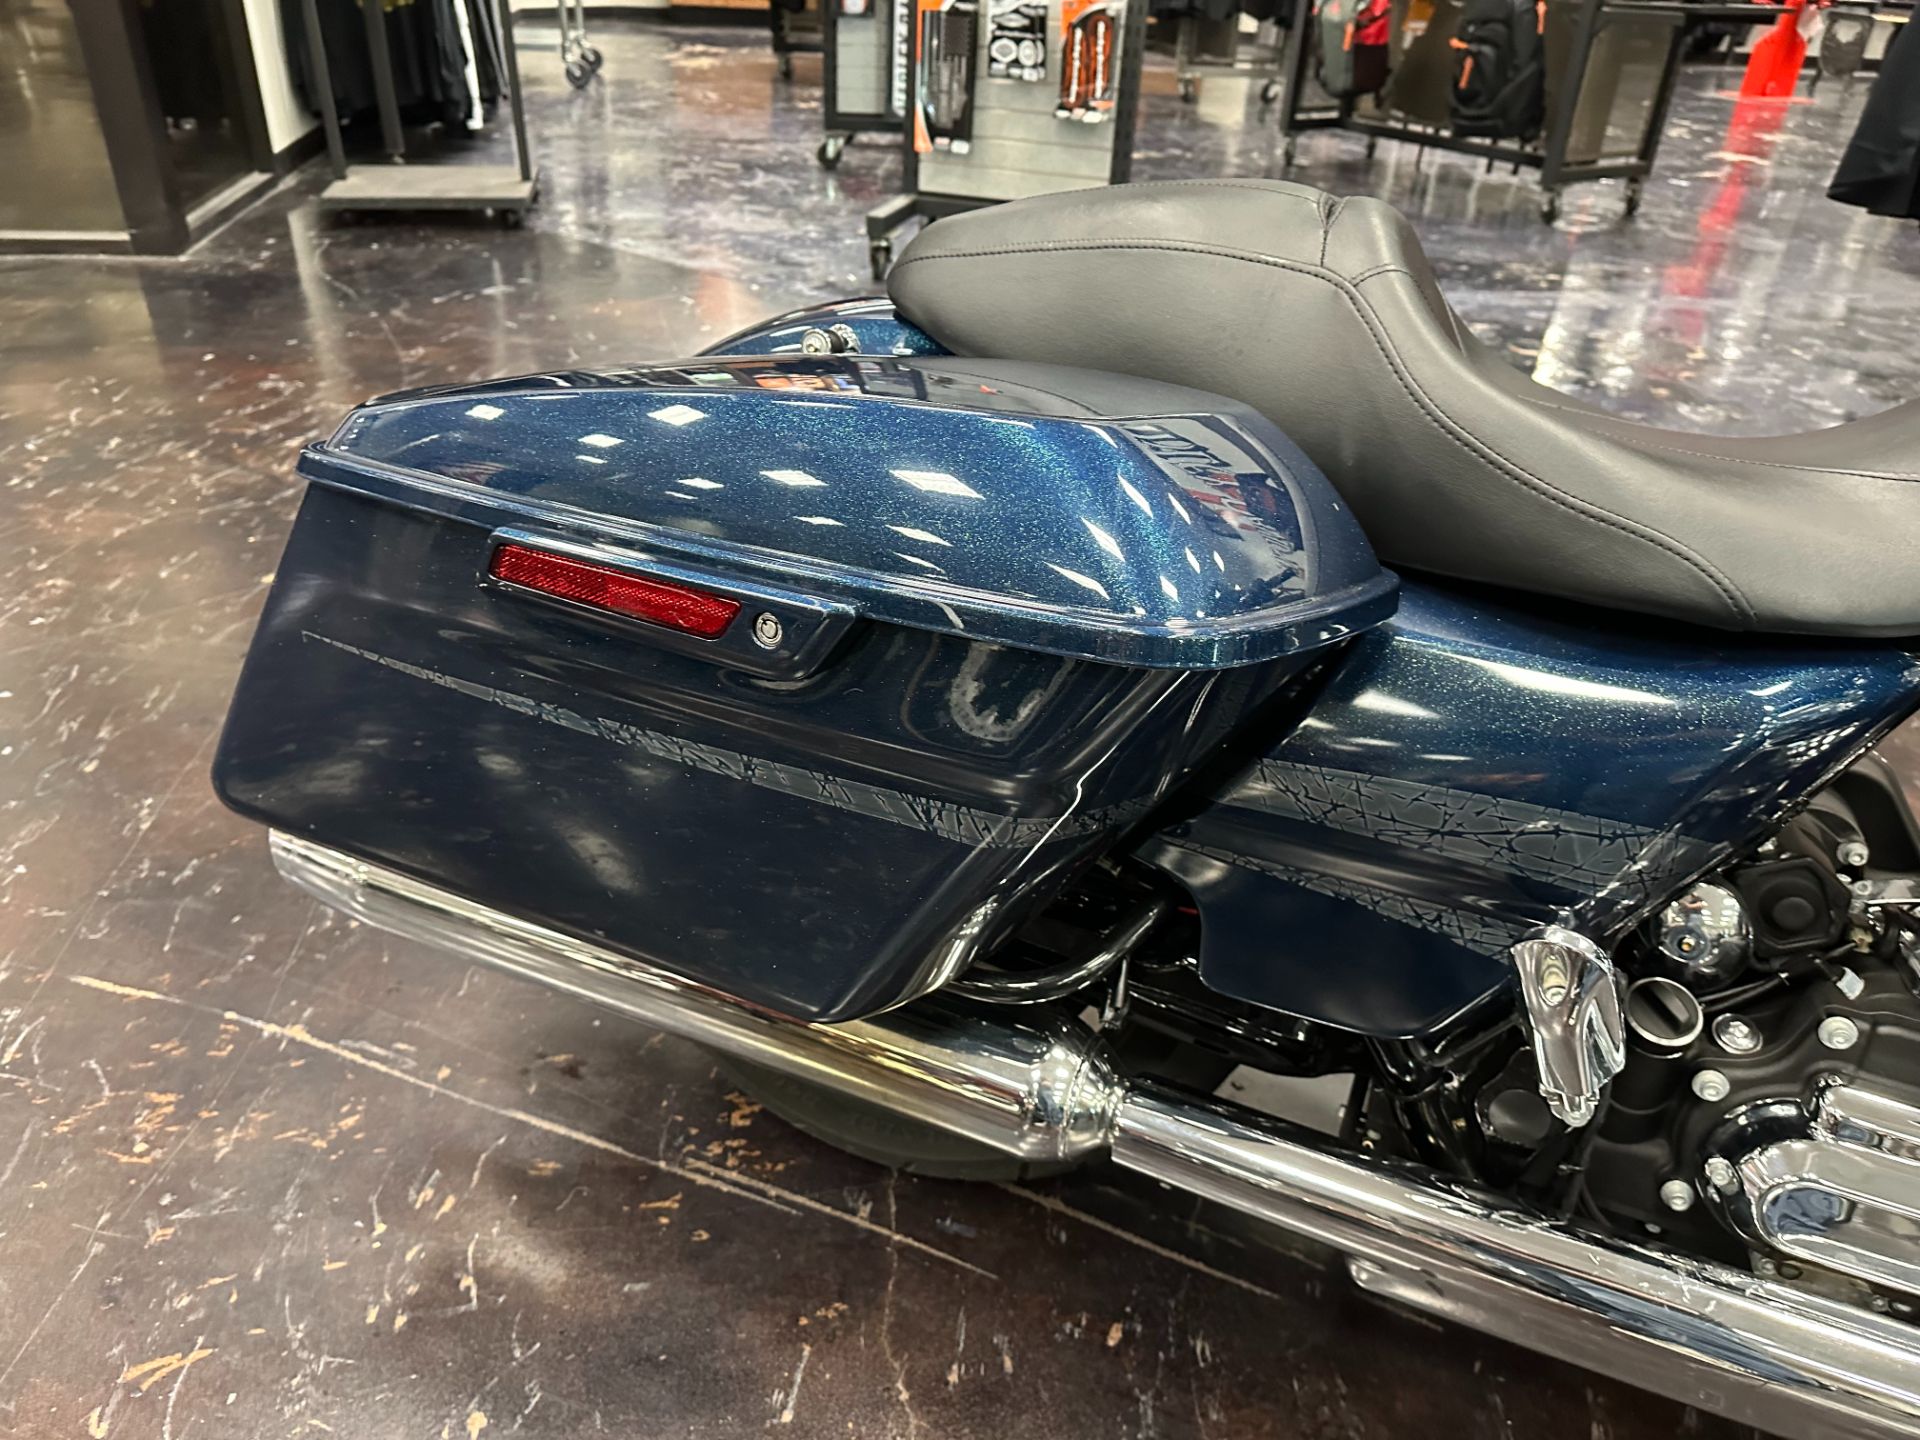 2016 Harley-Davidson Street Glide® Special in Metairie, Louisiana - Photo 8